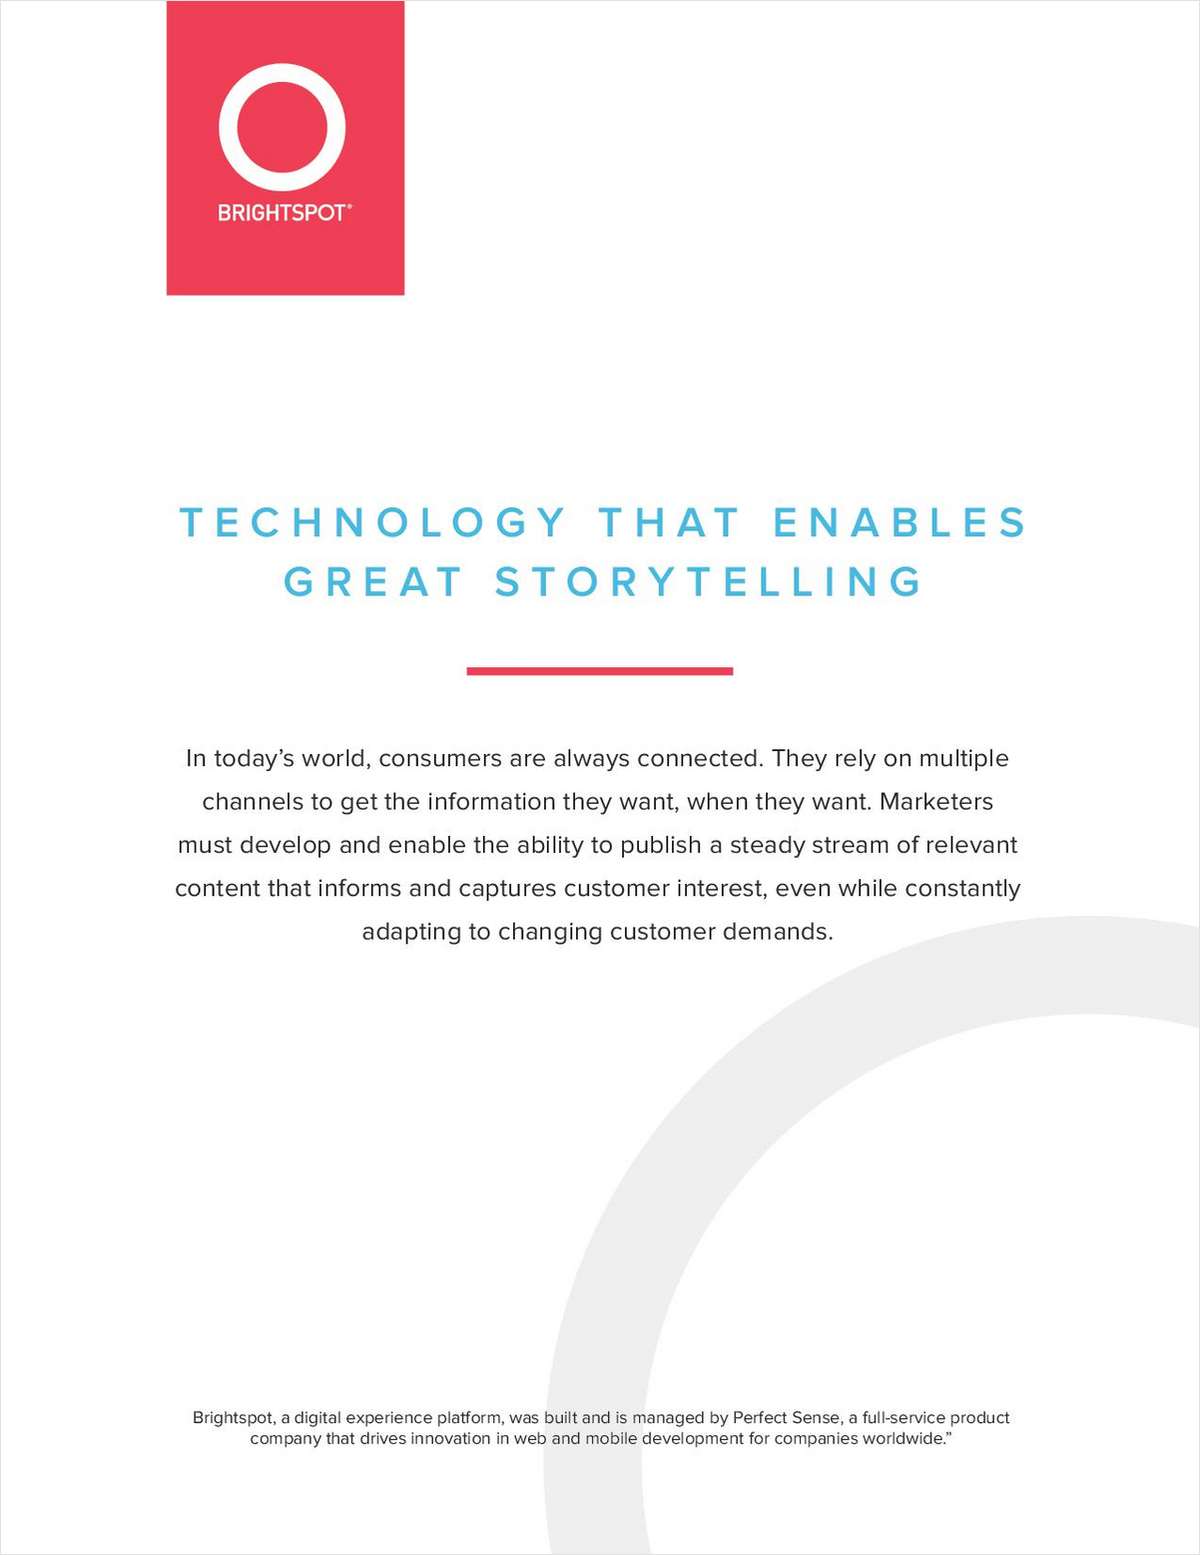 Technology that Enables Great Storytelling